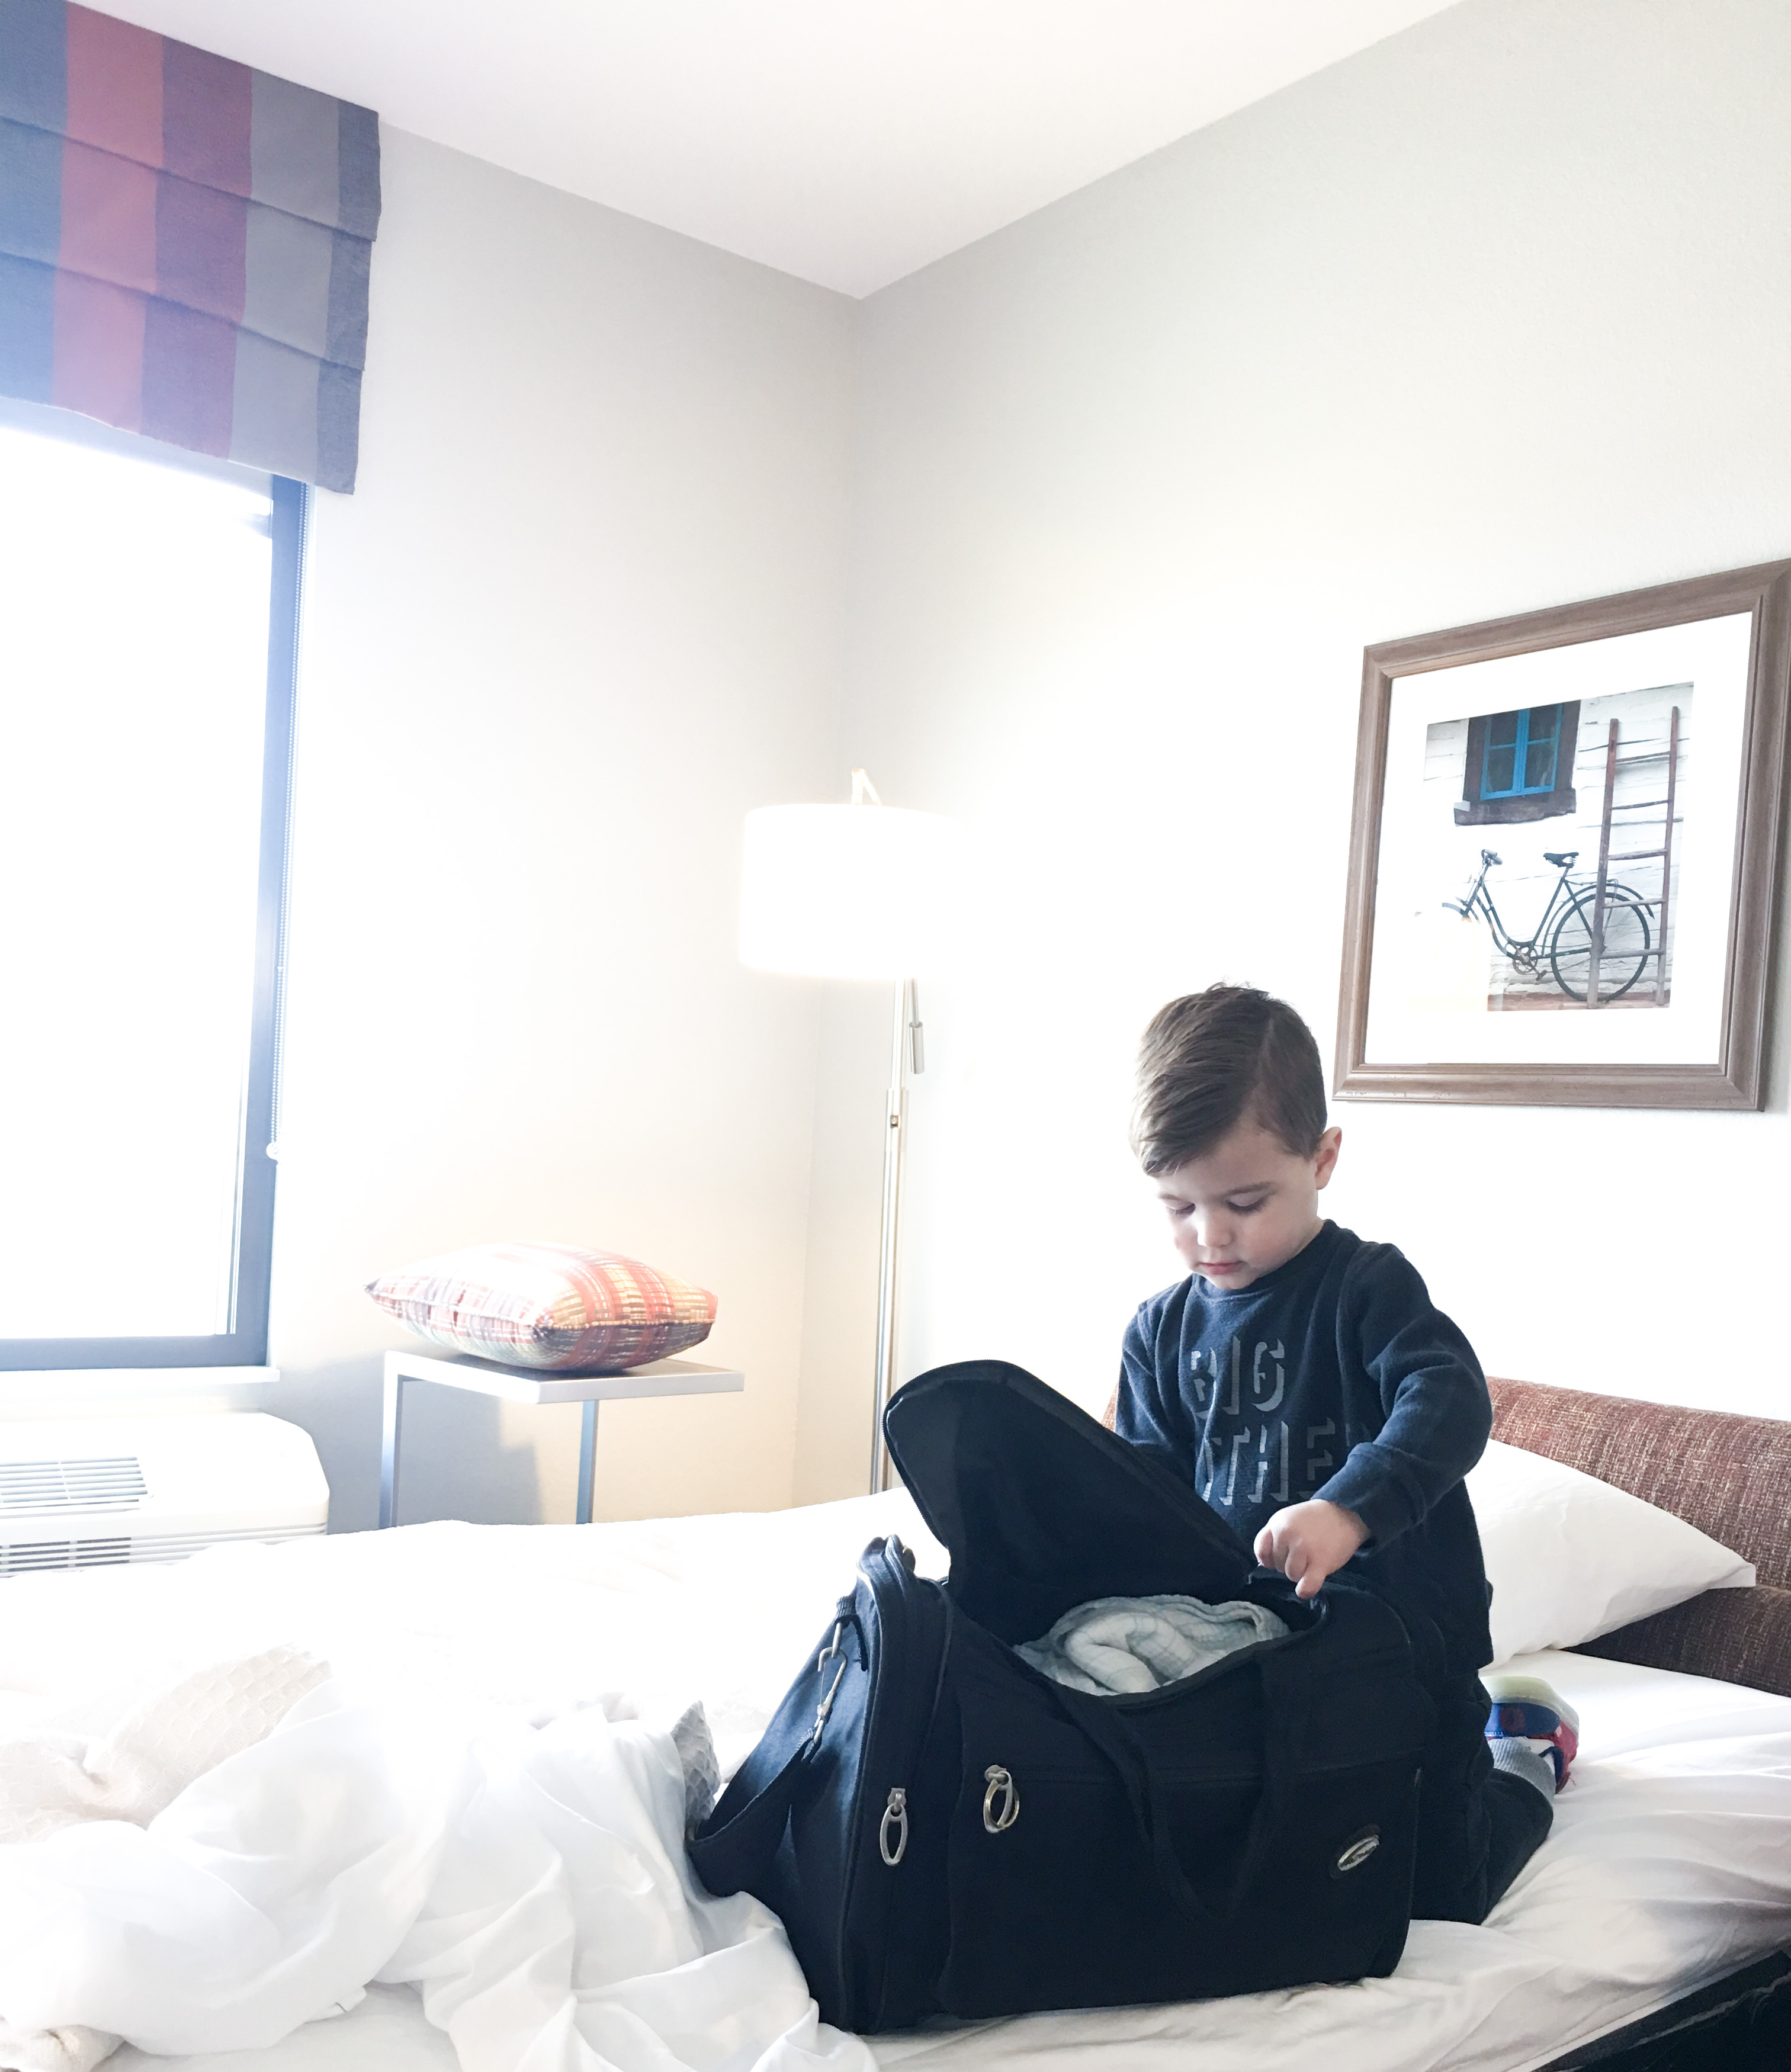 What to Do in Pittsburg,Kansas - Pittsburg is one of the largest cities in southeast Kansas! If you're planning to travel to Pittsburg, KS, here is a Pittsburg Kansas Travel Guide to show you how I kept myself and two kids busy in southeast Kansas!